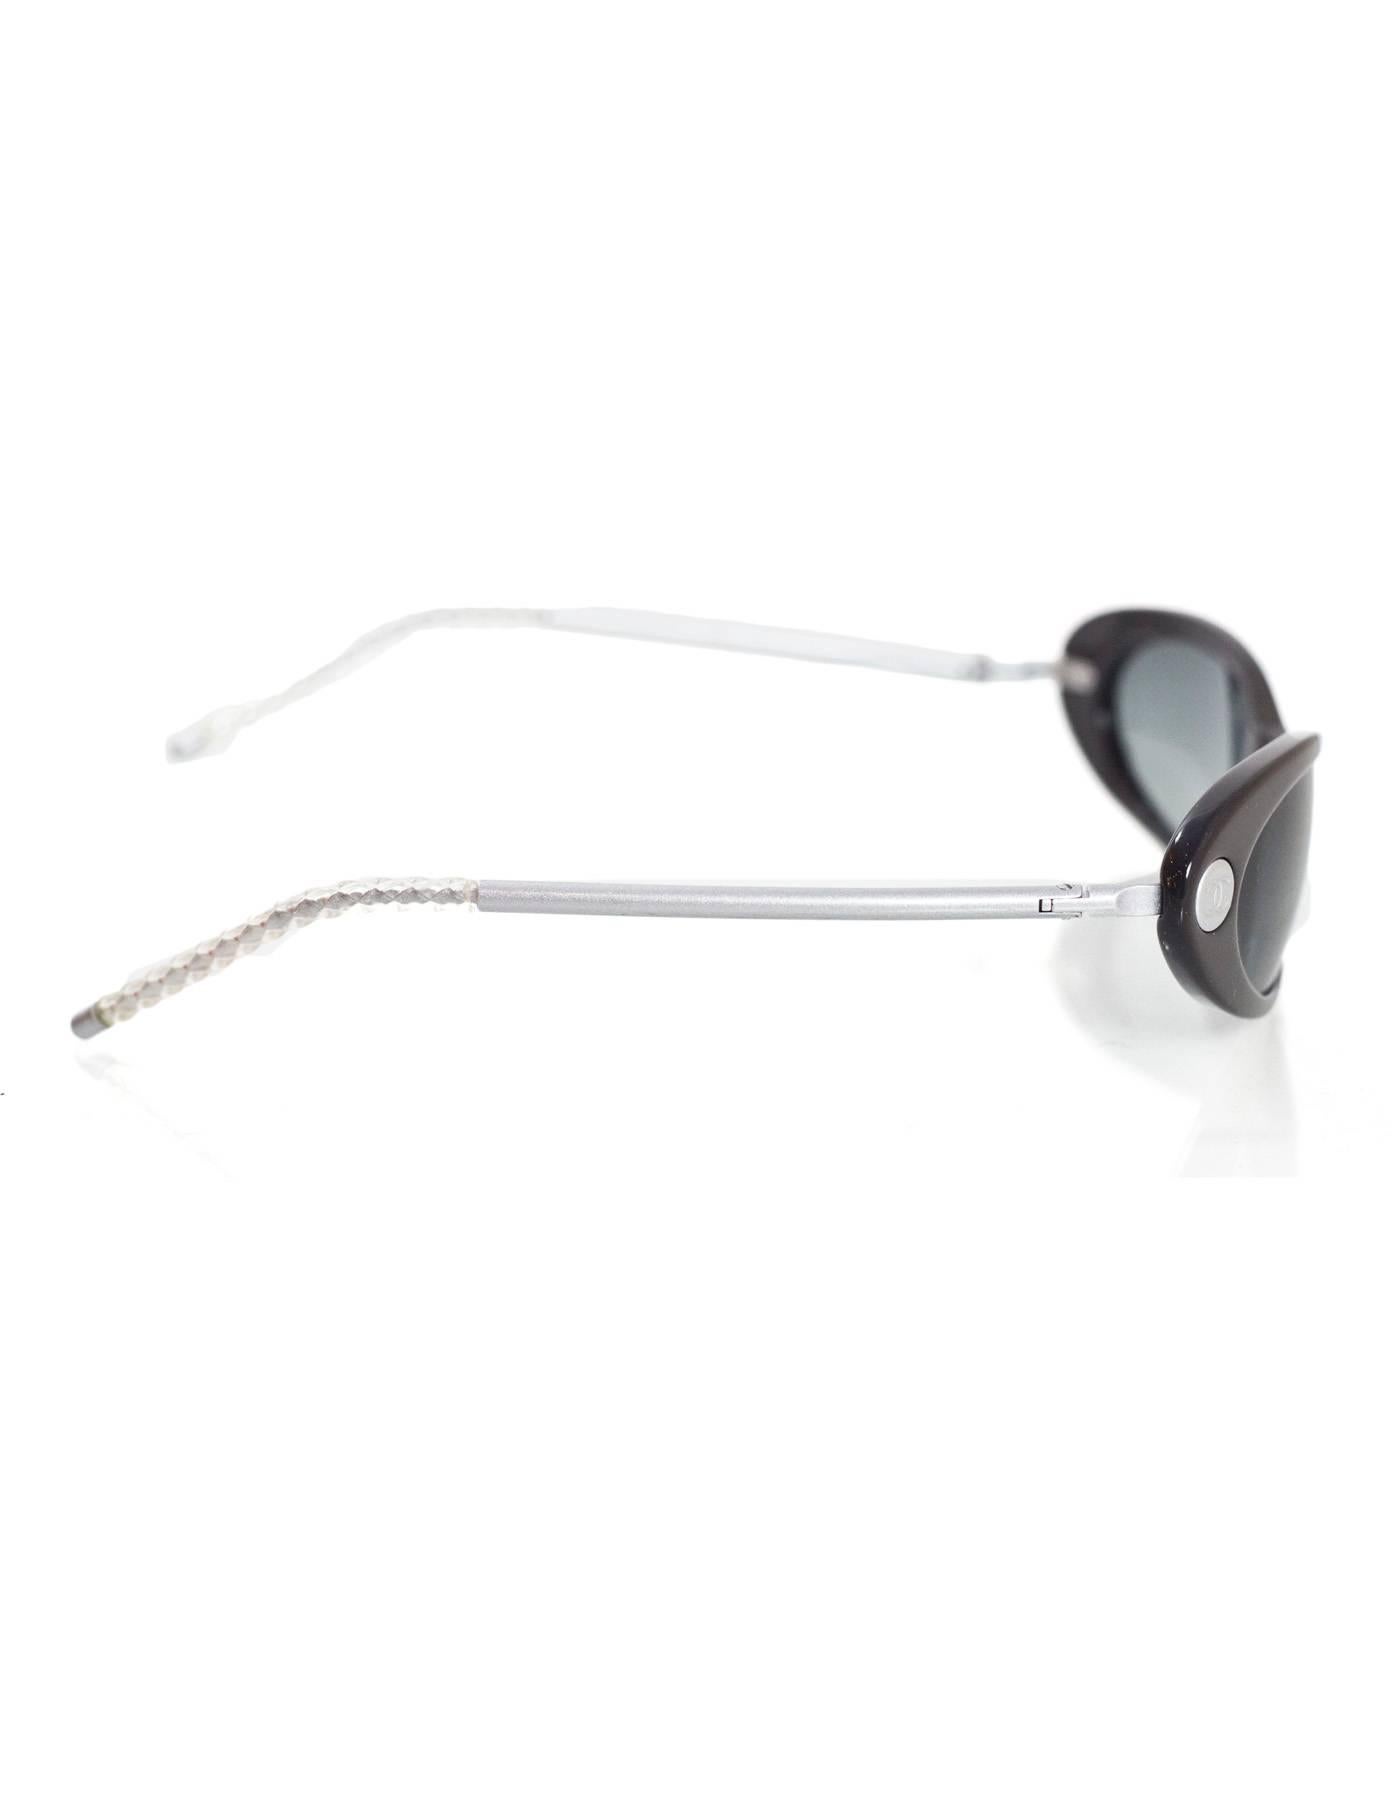 Chanel Vintage Grey Cat Eye Sunglasses 
Features silver CC's on either side of lenses

Made In: Italy
Color: Silver and charcoal
Materials: Metal and resin
Stamp: C1187734
Overall Condition: Excellent pre-owned condition with the exception of one